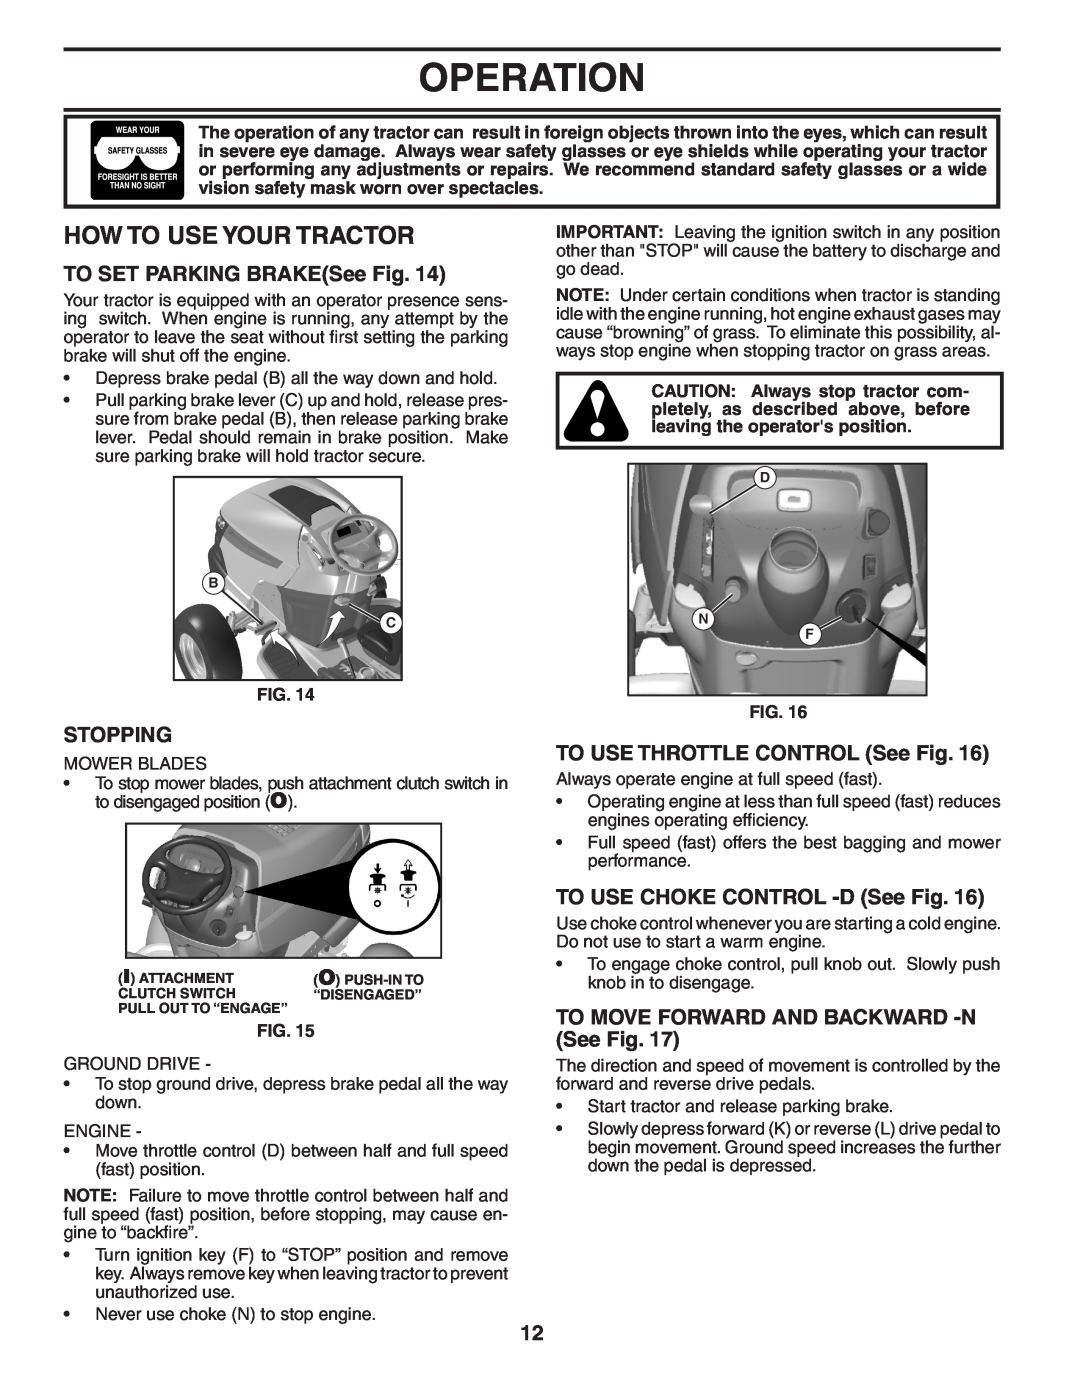 Poulan 405035 How To Use Your Tractor, TO SET PARKING BRAKESee Fig, Stopping, TO USE THROTTLE CONTROL See Fig, Operation 